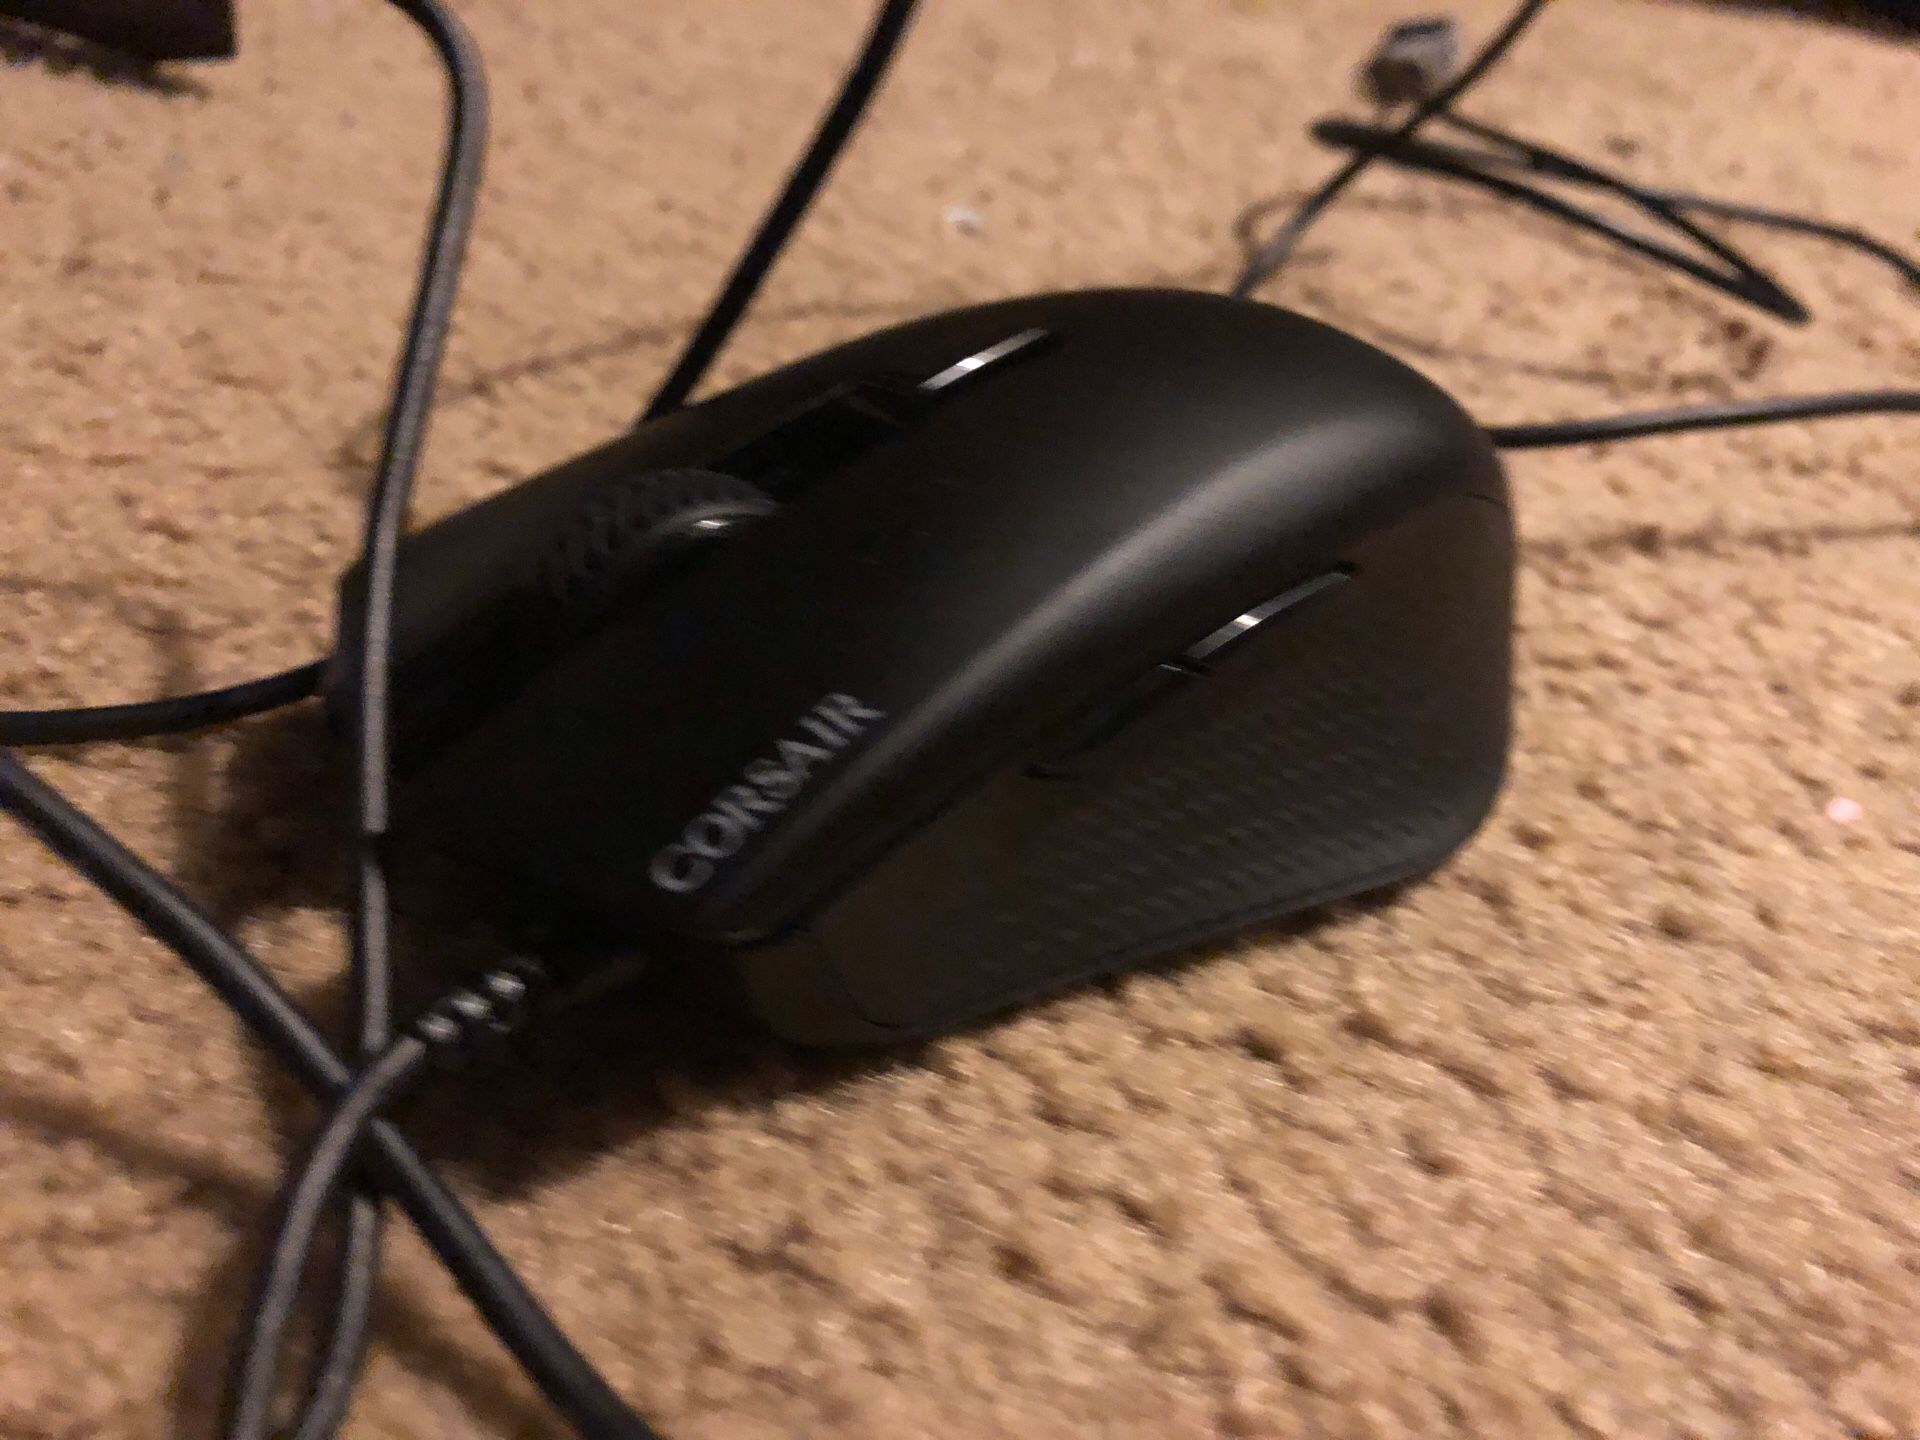 Harpoon gaming mouse